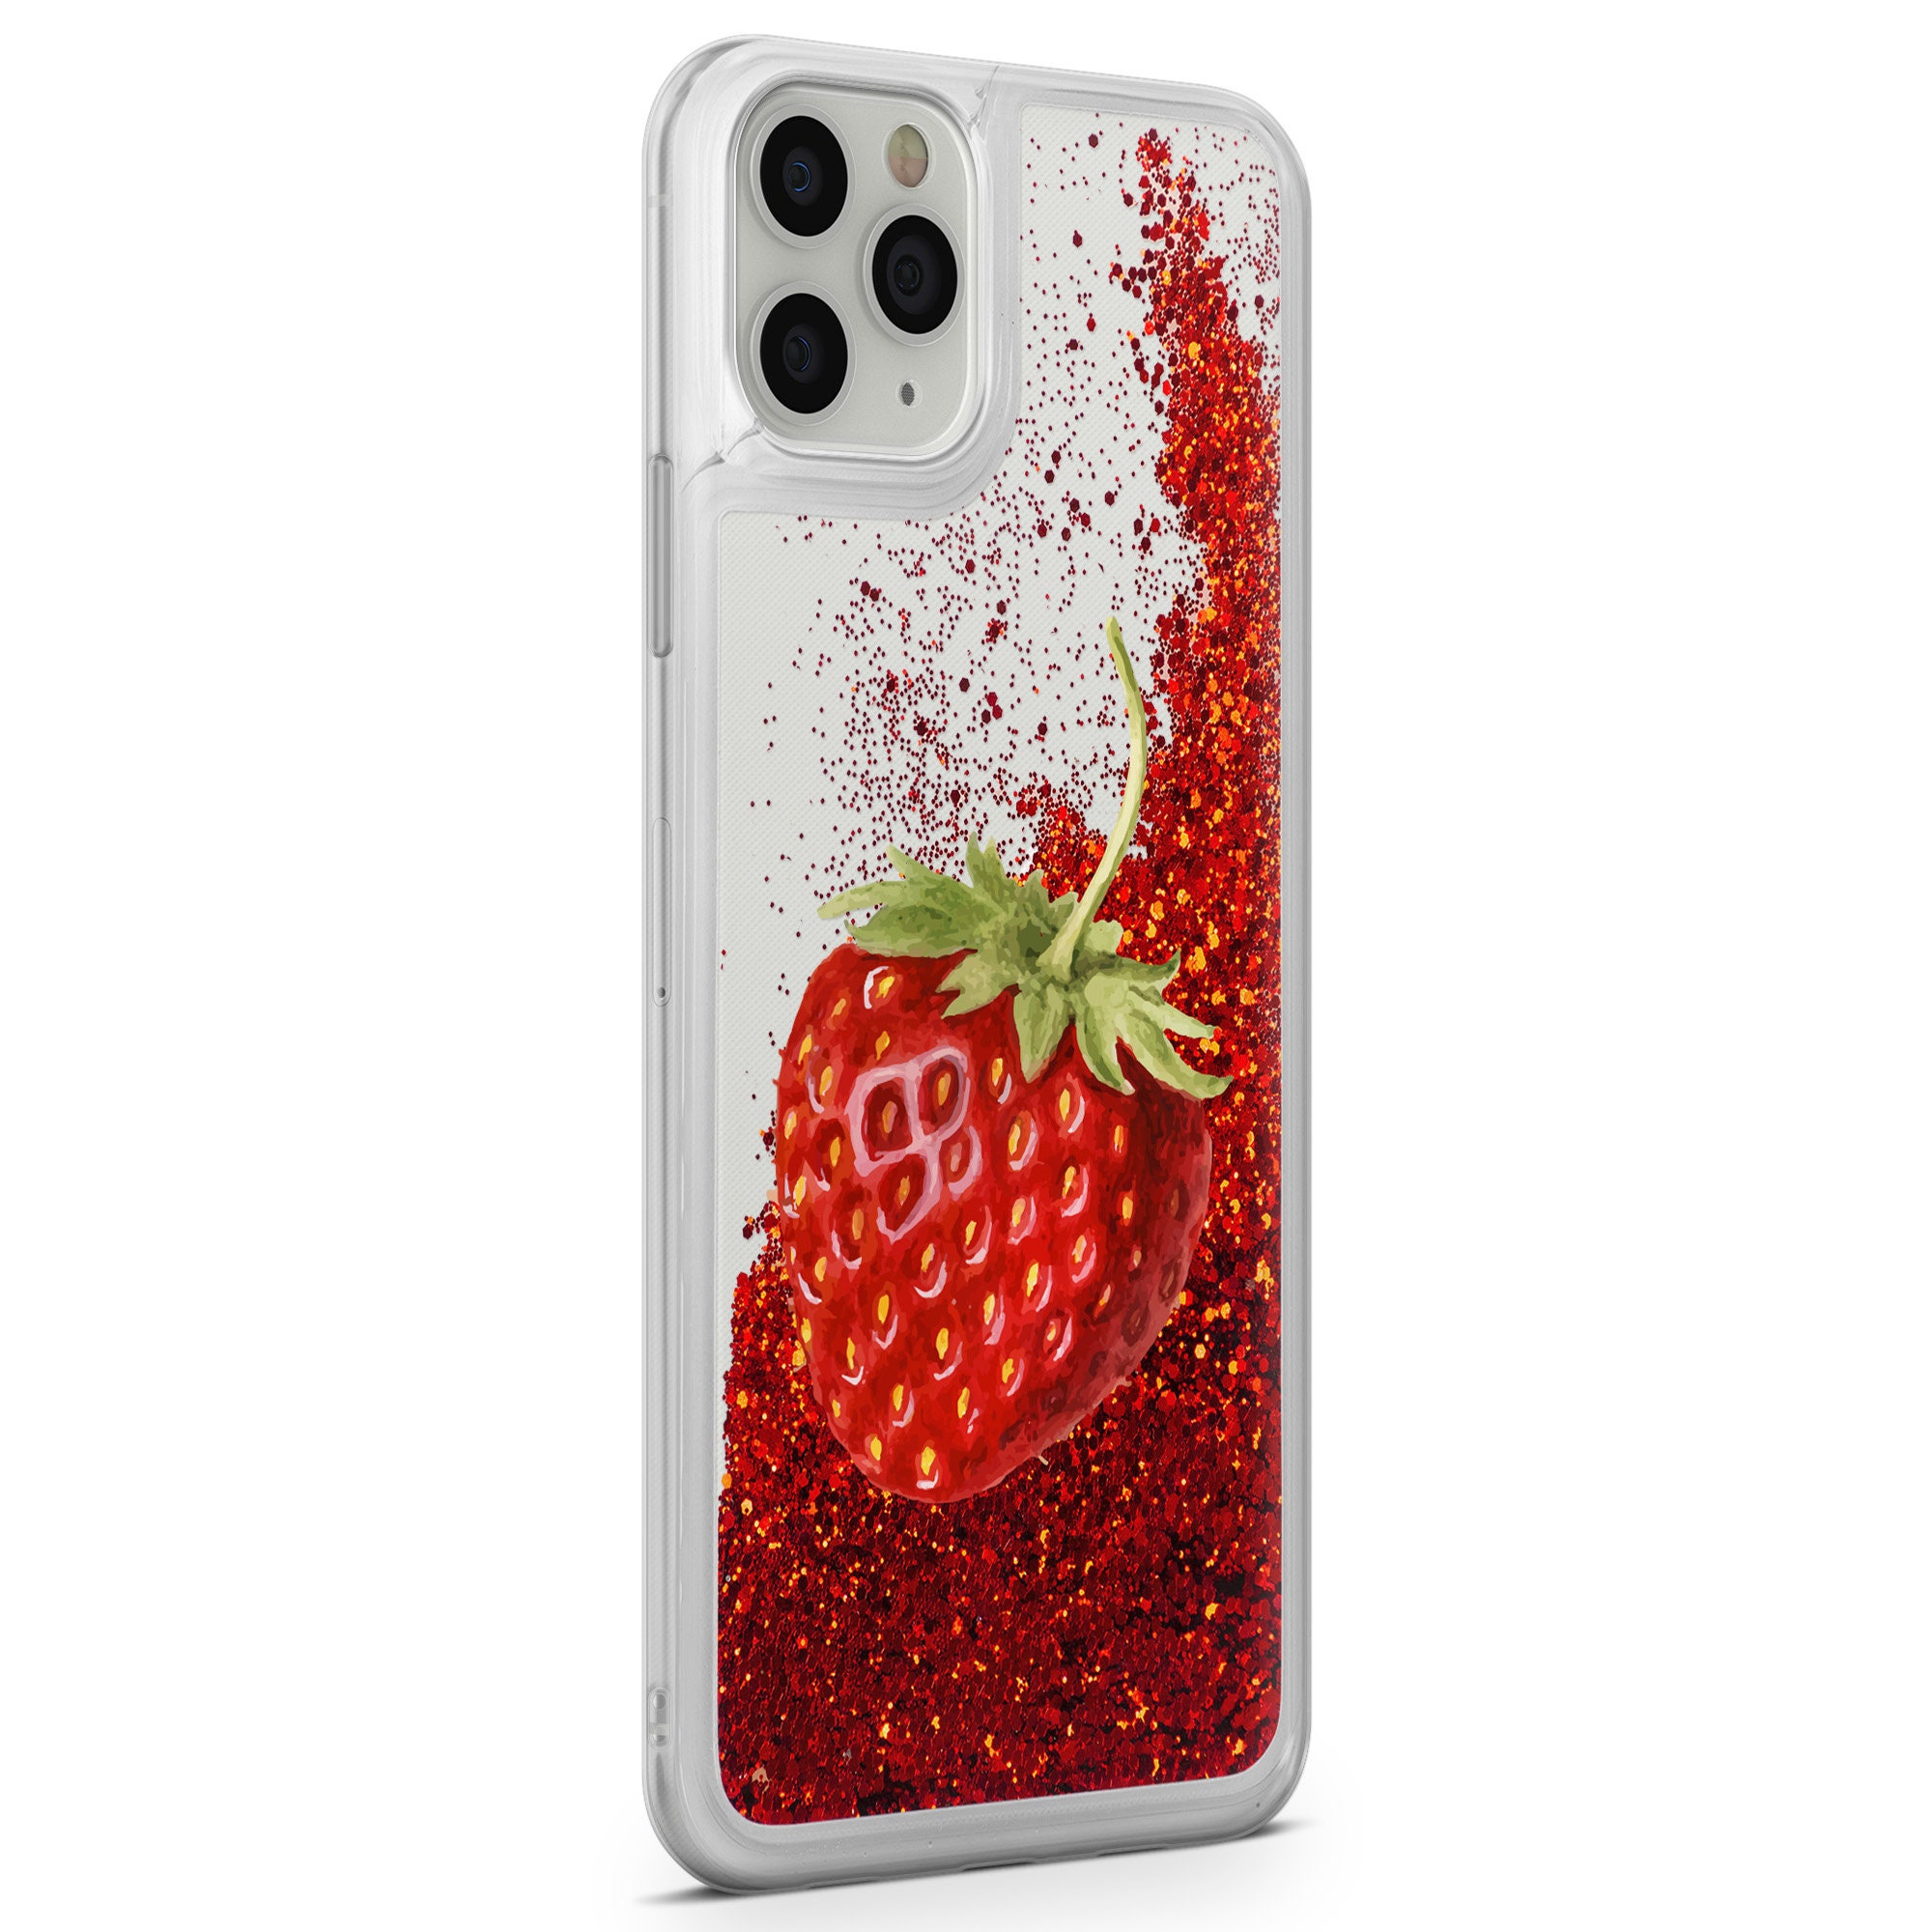 Red Glitter iPhone Case by NewburyBoutique